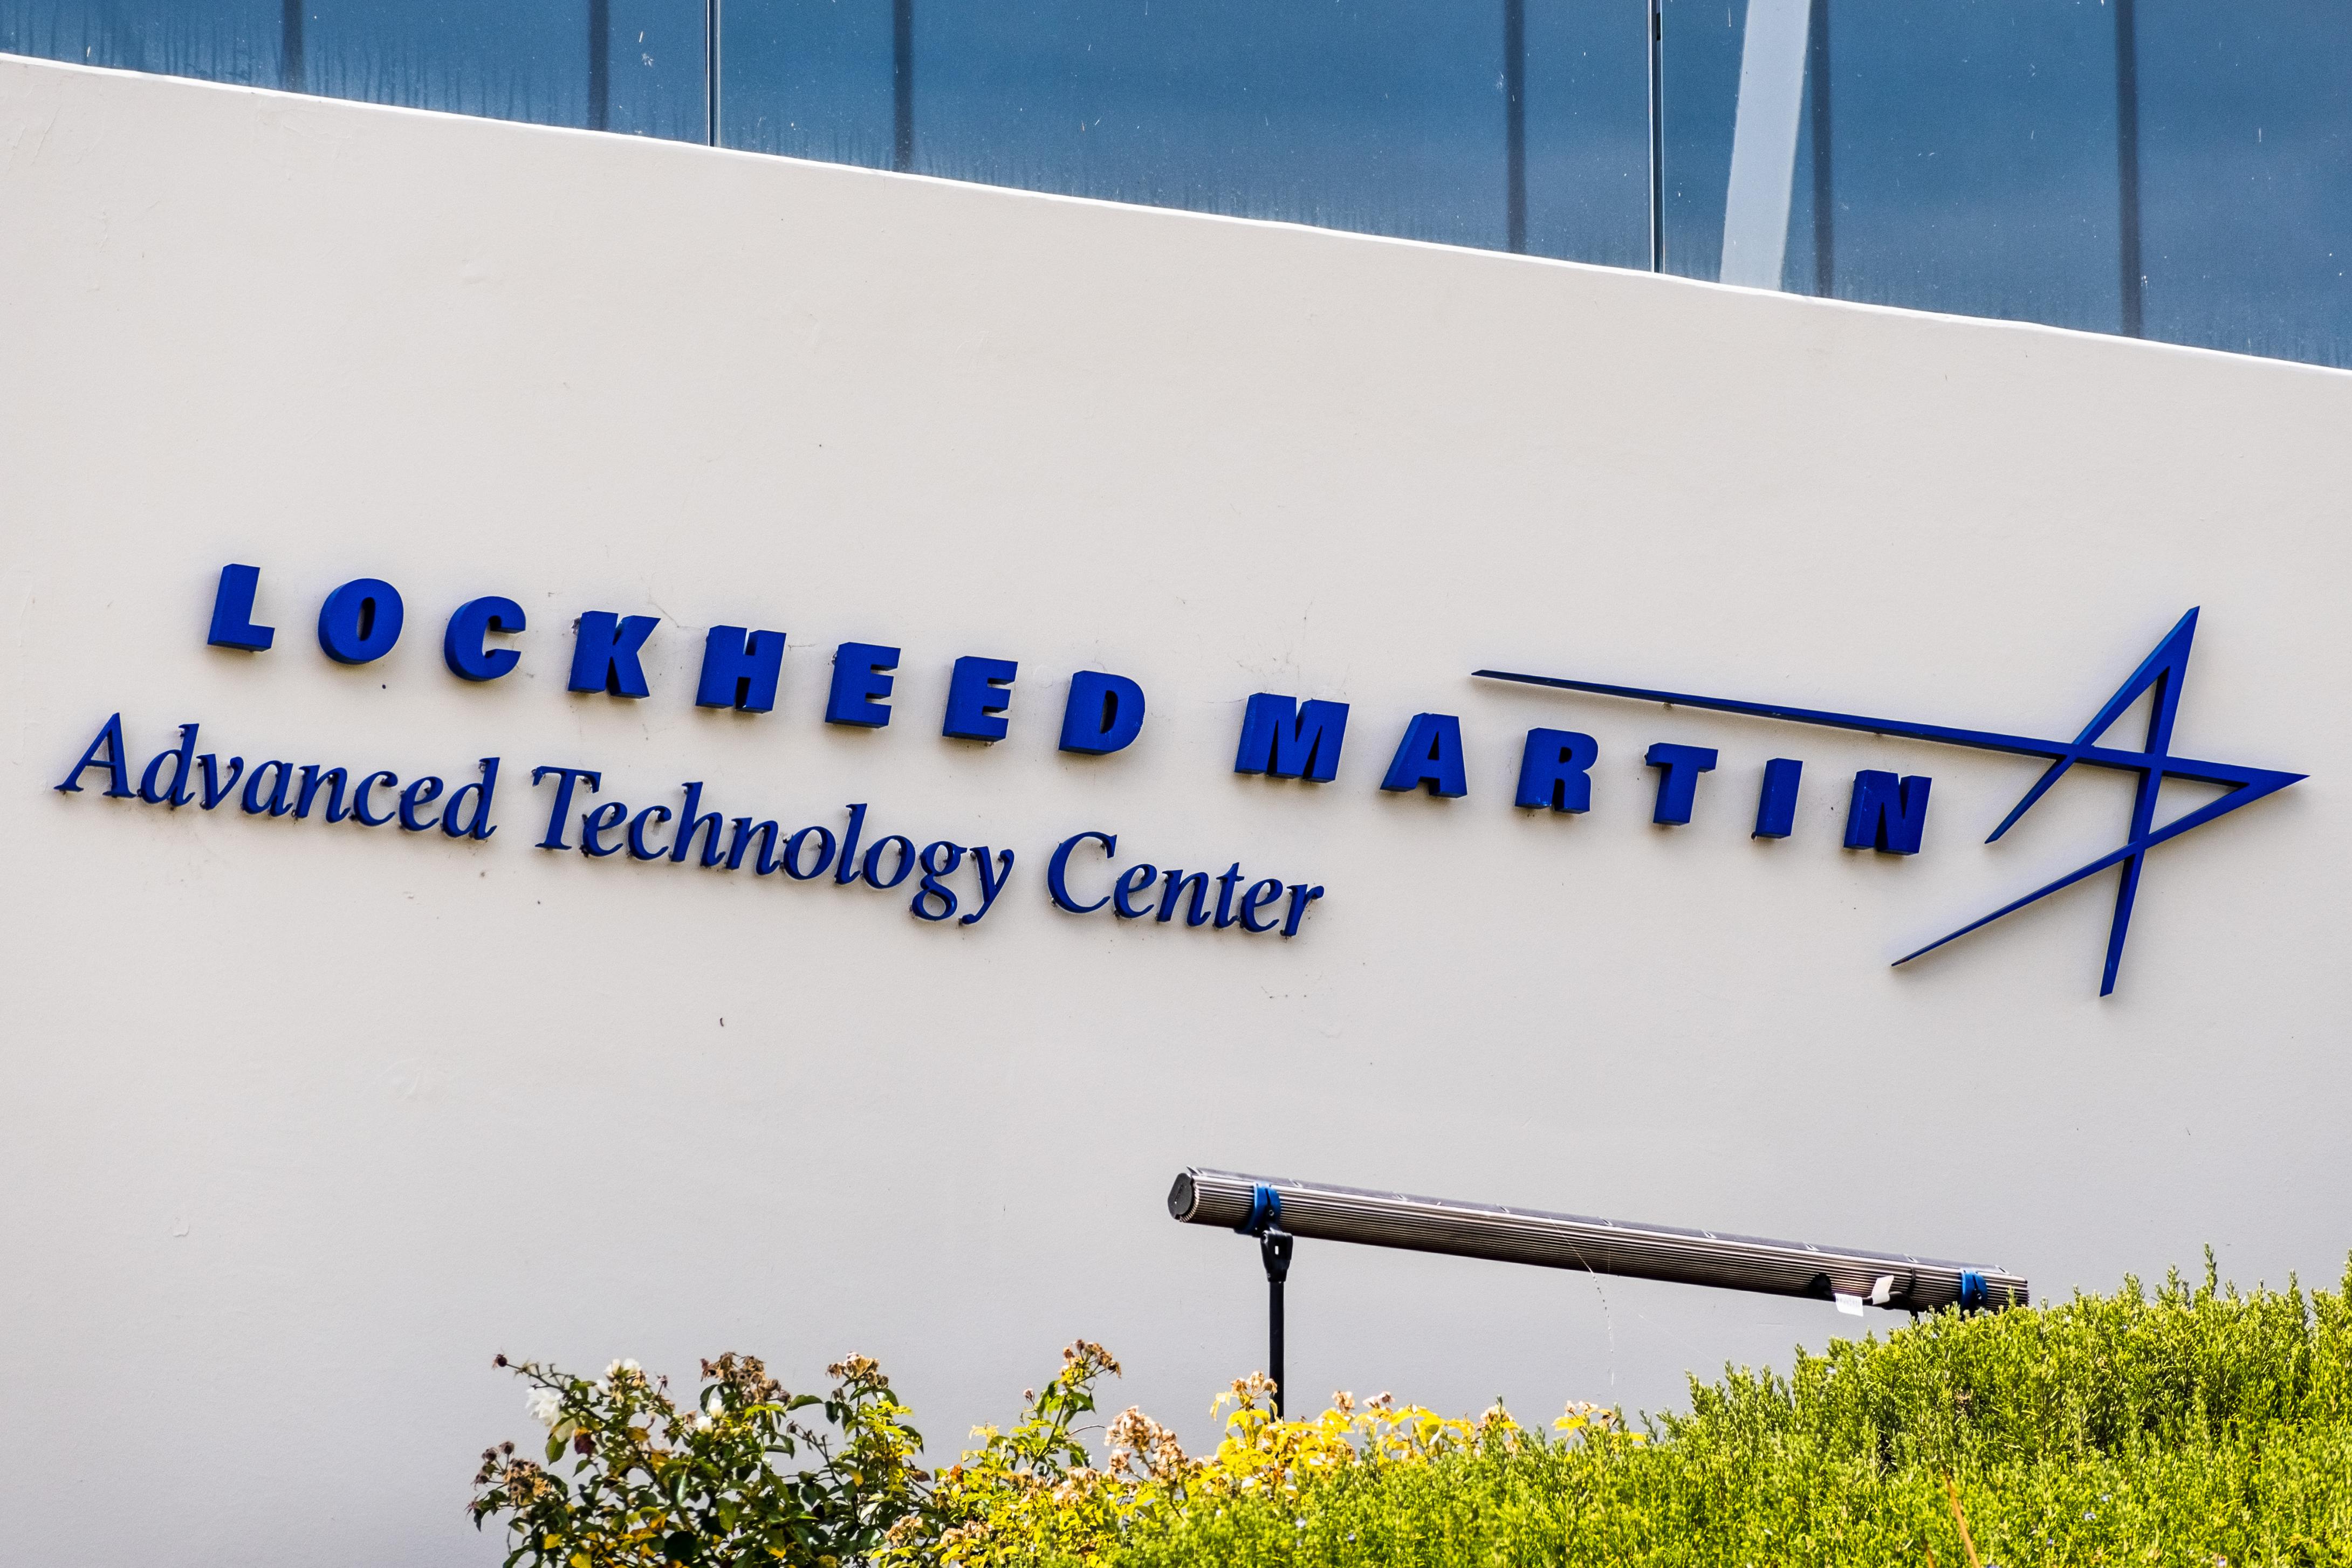 August 5, 2019 Palo Alto / CA / USA - Lockheed Martin Advanced Technology Center (ATC) sign in their campus located in Silicon Valley; it is the R&D center of Lockheed Martin Corporation